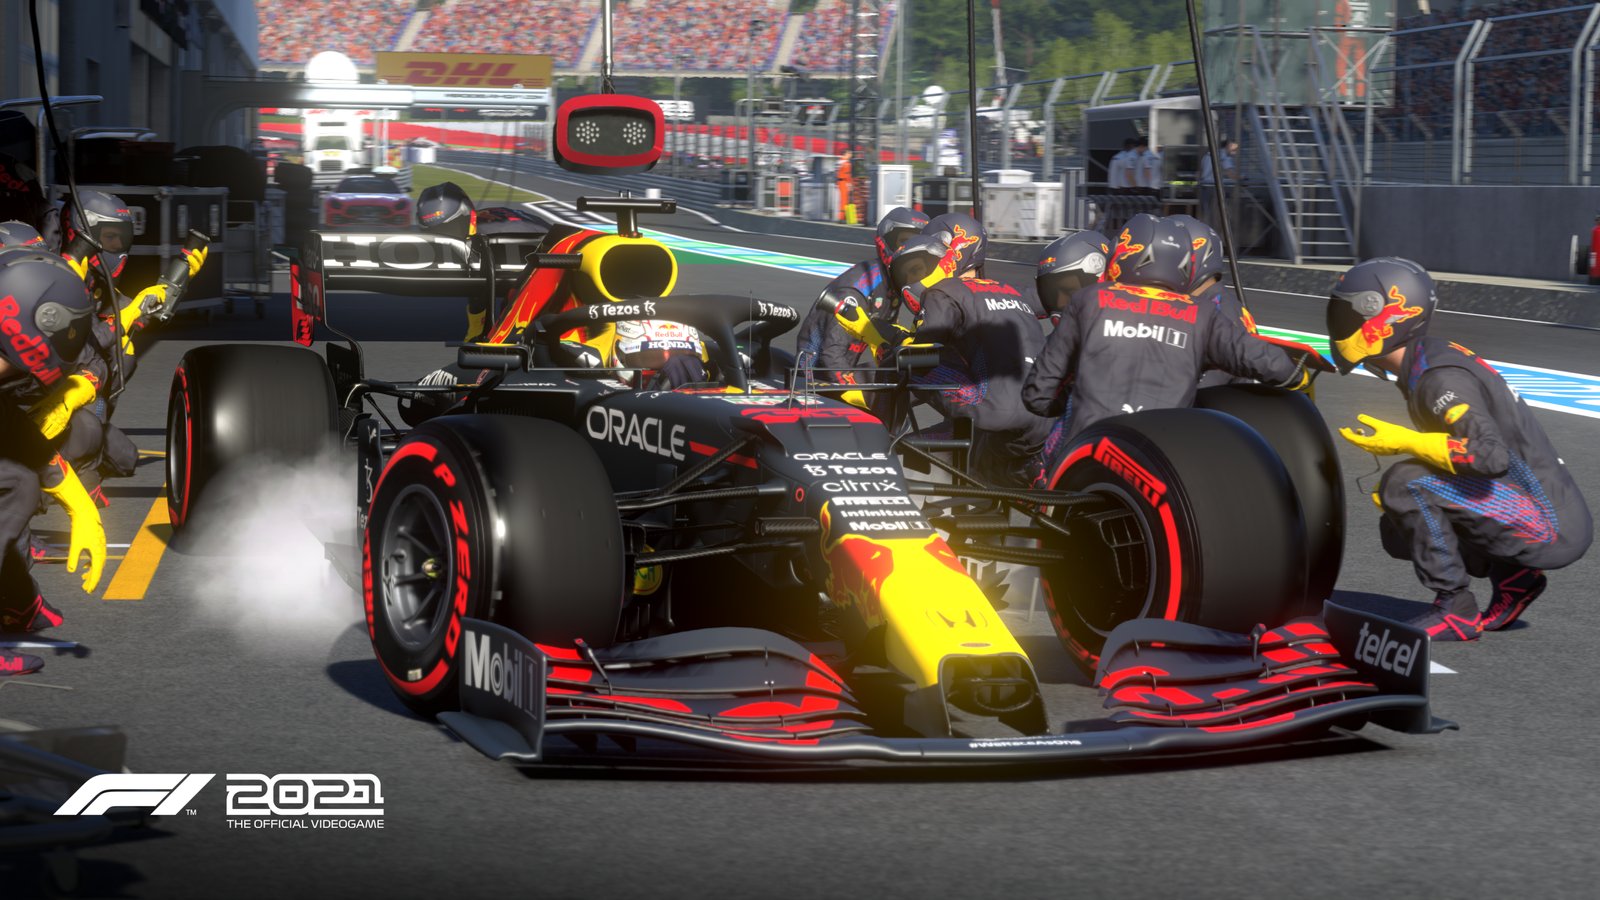 F1 2021 Flashback New Ea Game Adds A New Dimension To A Format That Depended On Fast Cars Only Ents Arts News